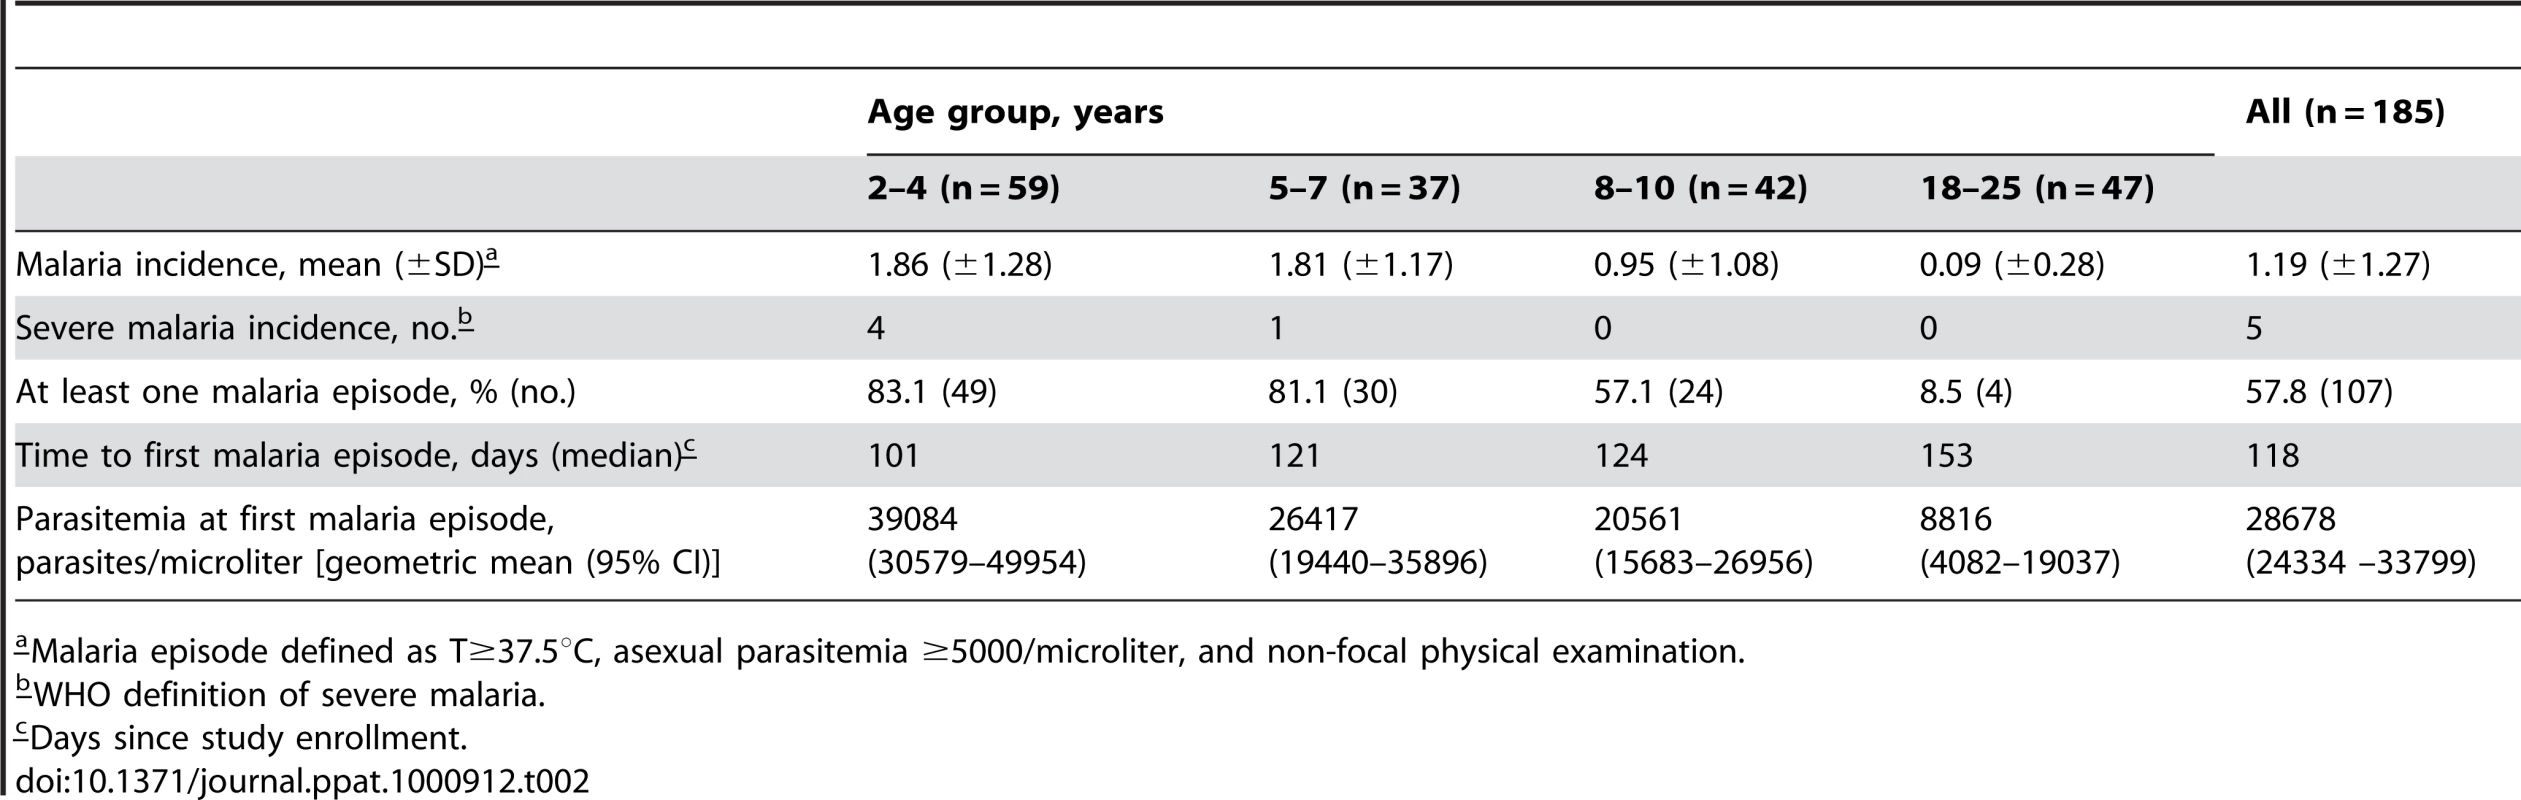 Malaria clinical outcomes by age group.